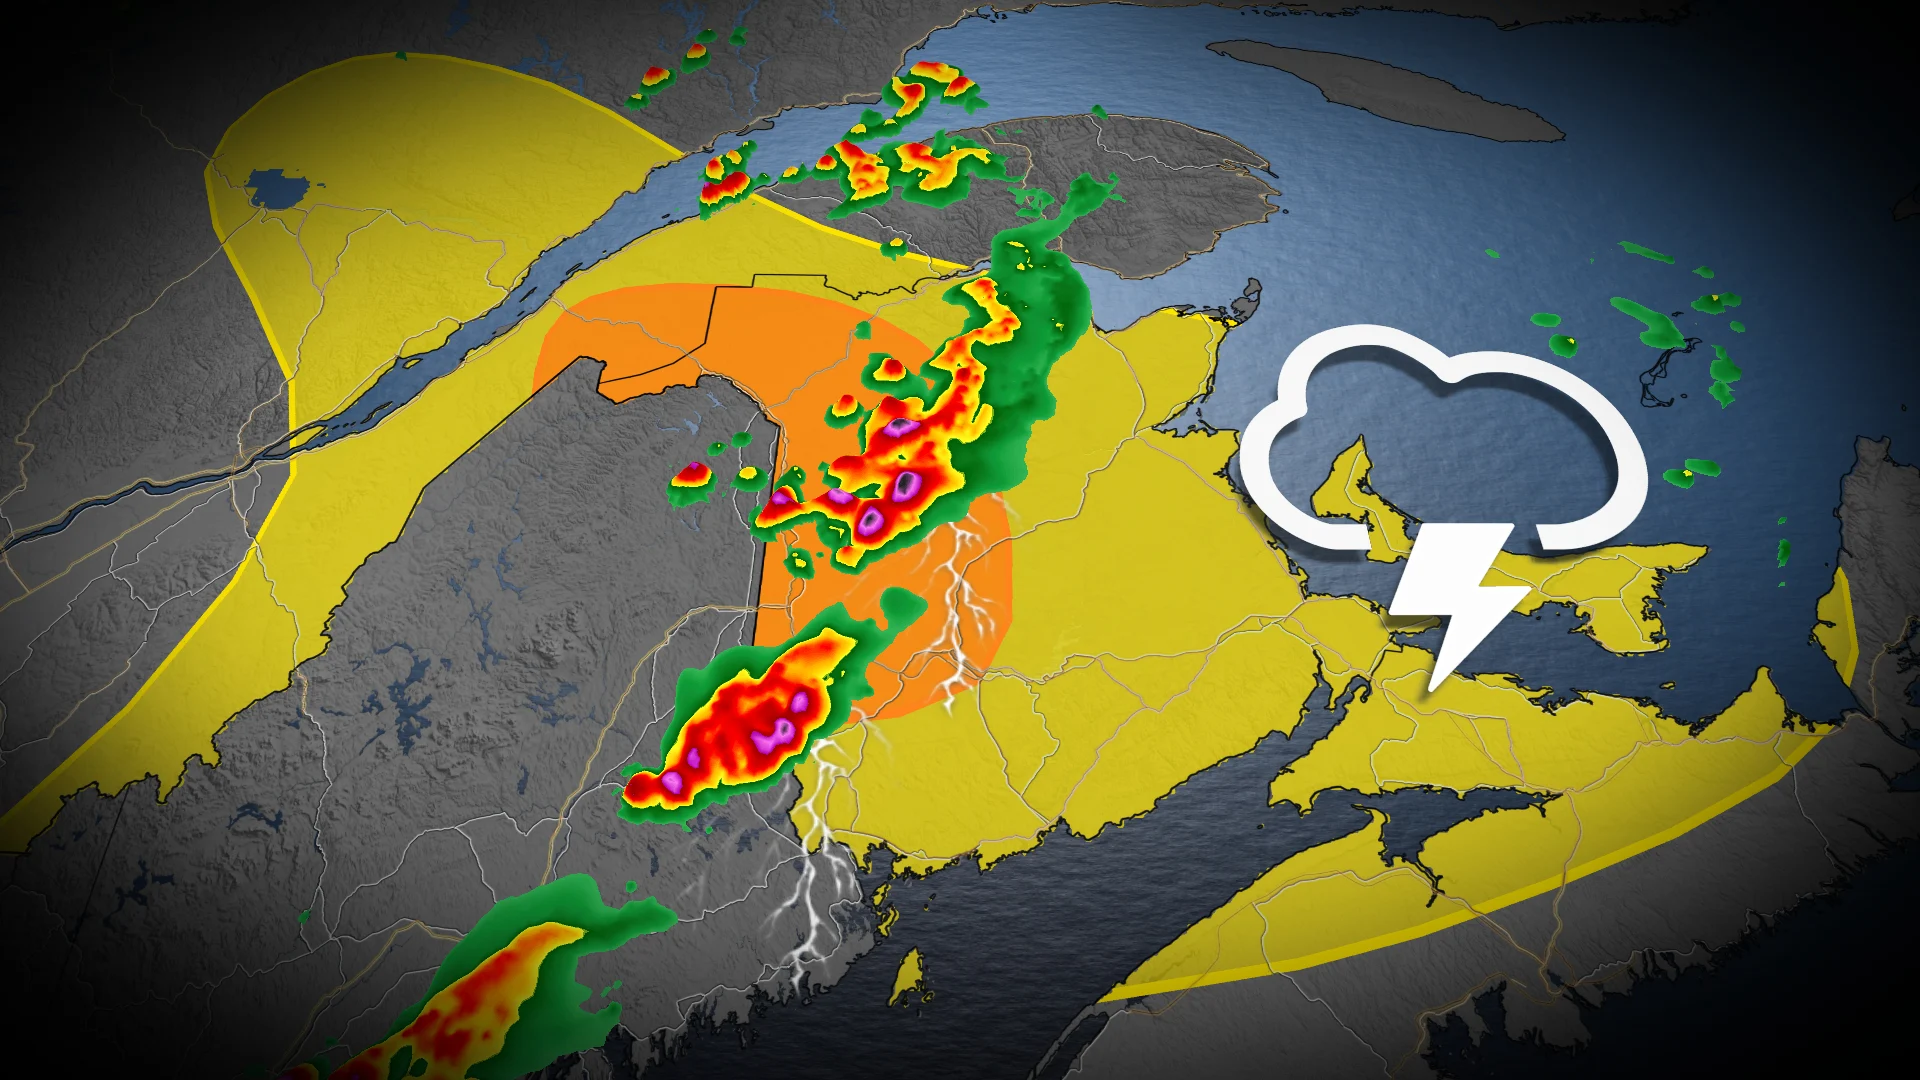 Severe thunderstorm threat spans the Maritimes today, with risk for strong winds and large hail. See the timing, here